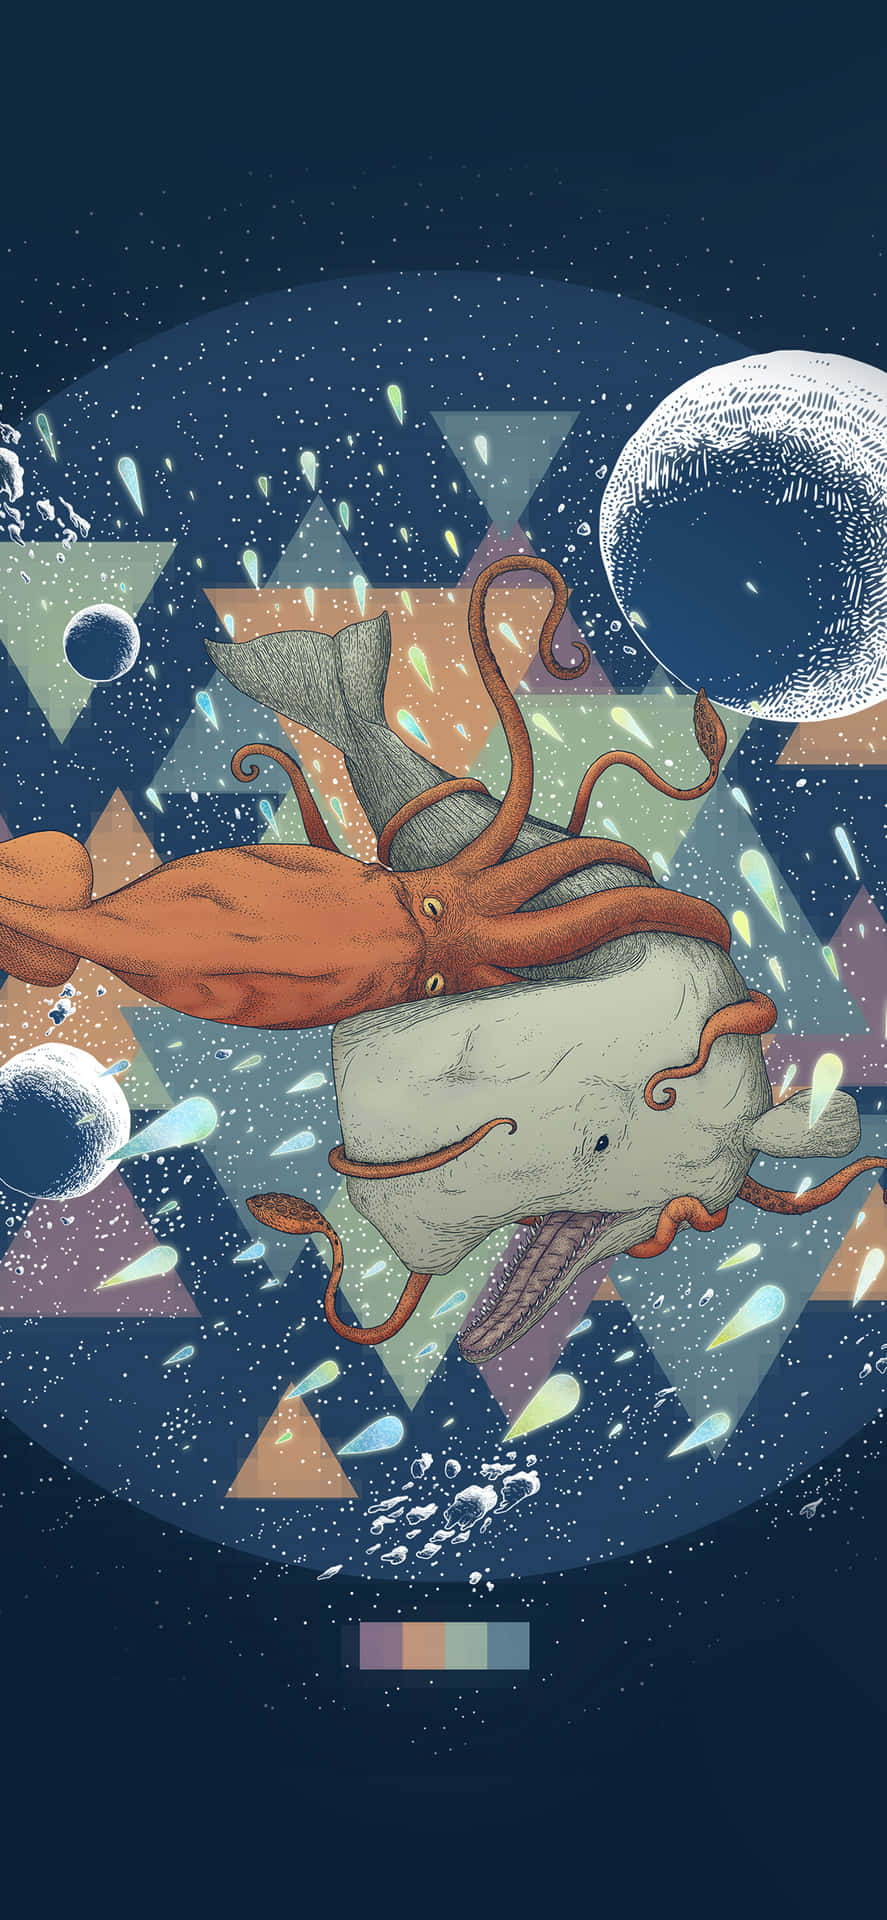 A Giant Squid Fills the Oceans with Mystery